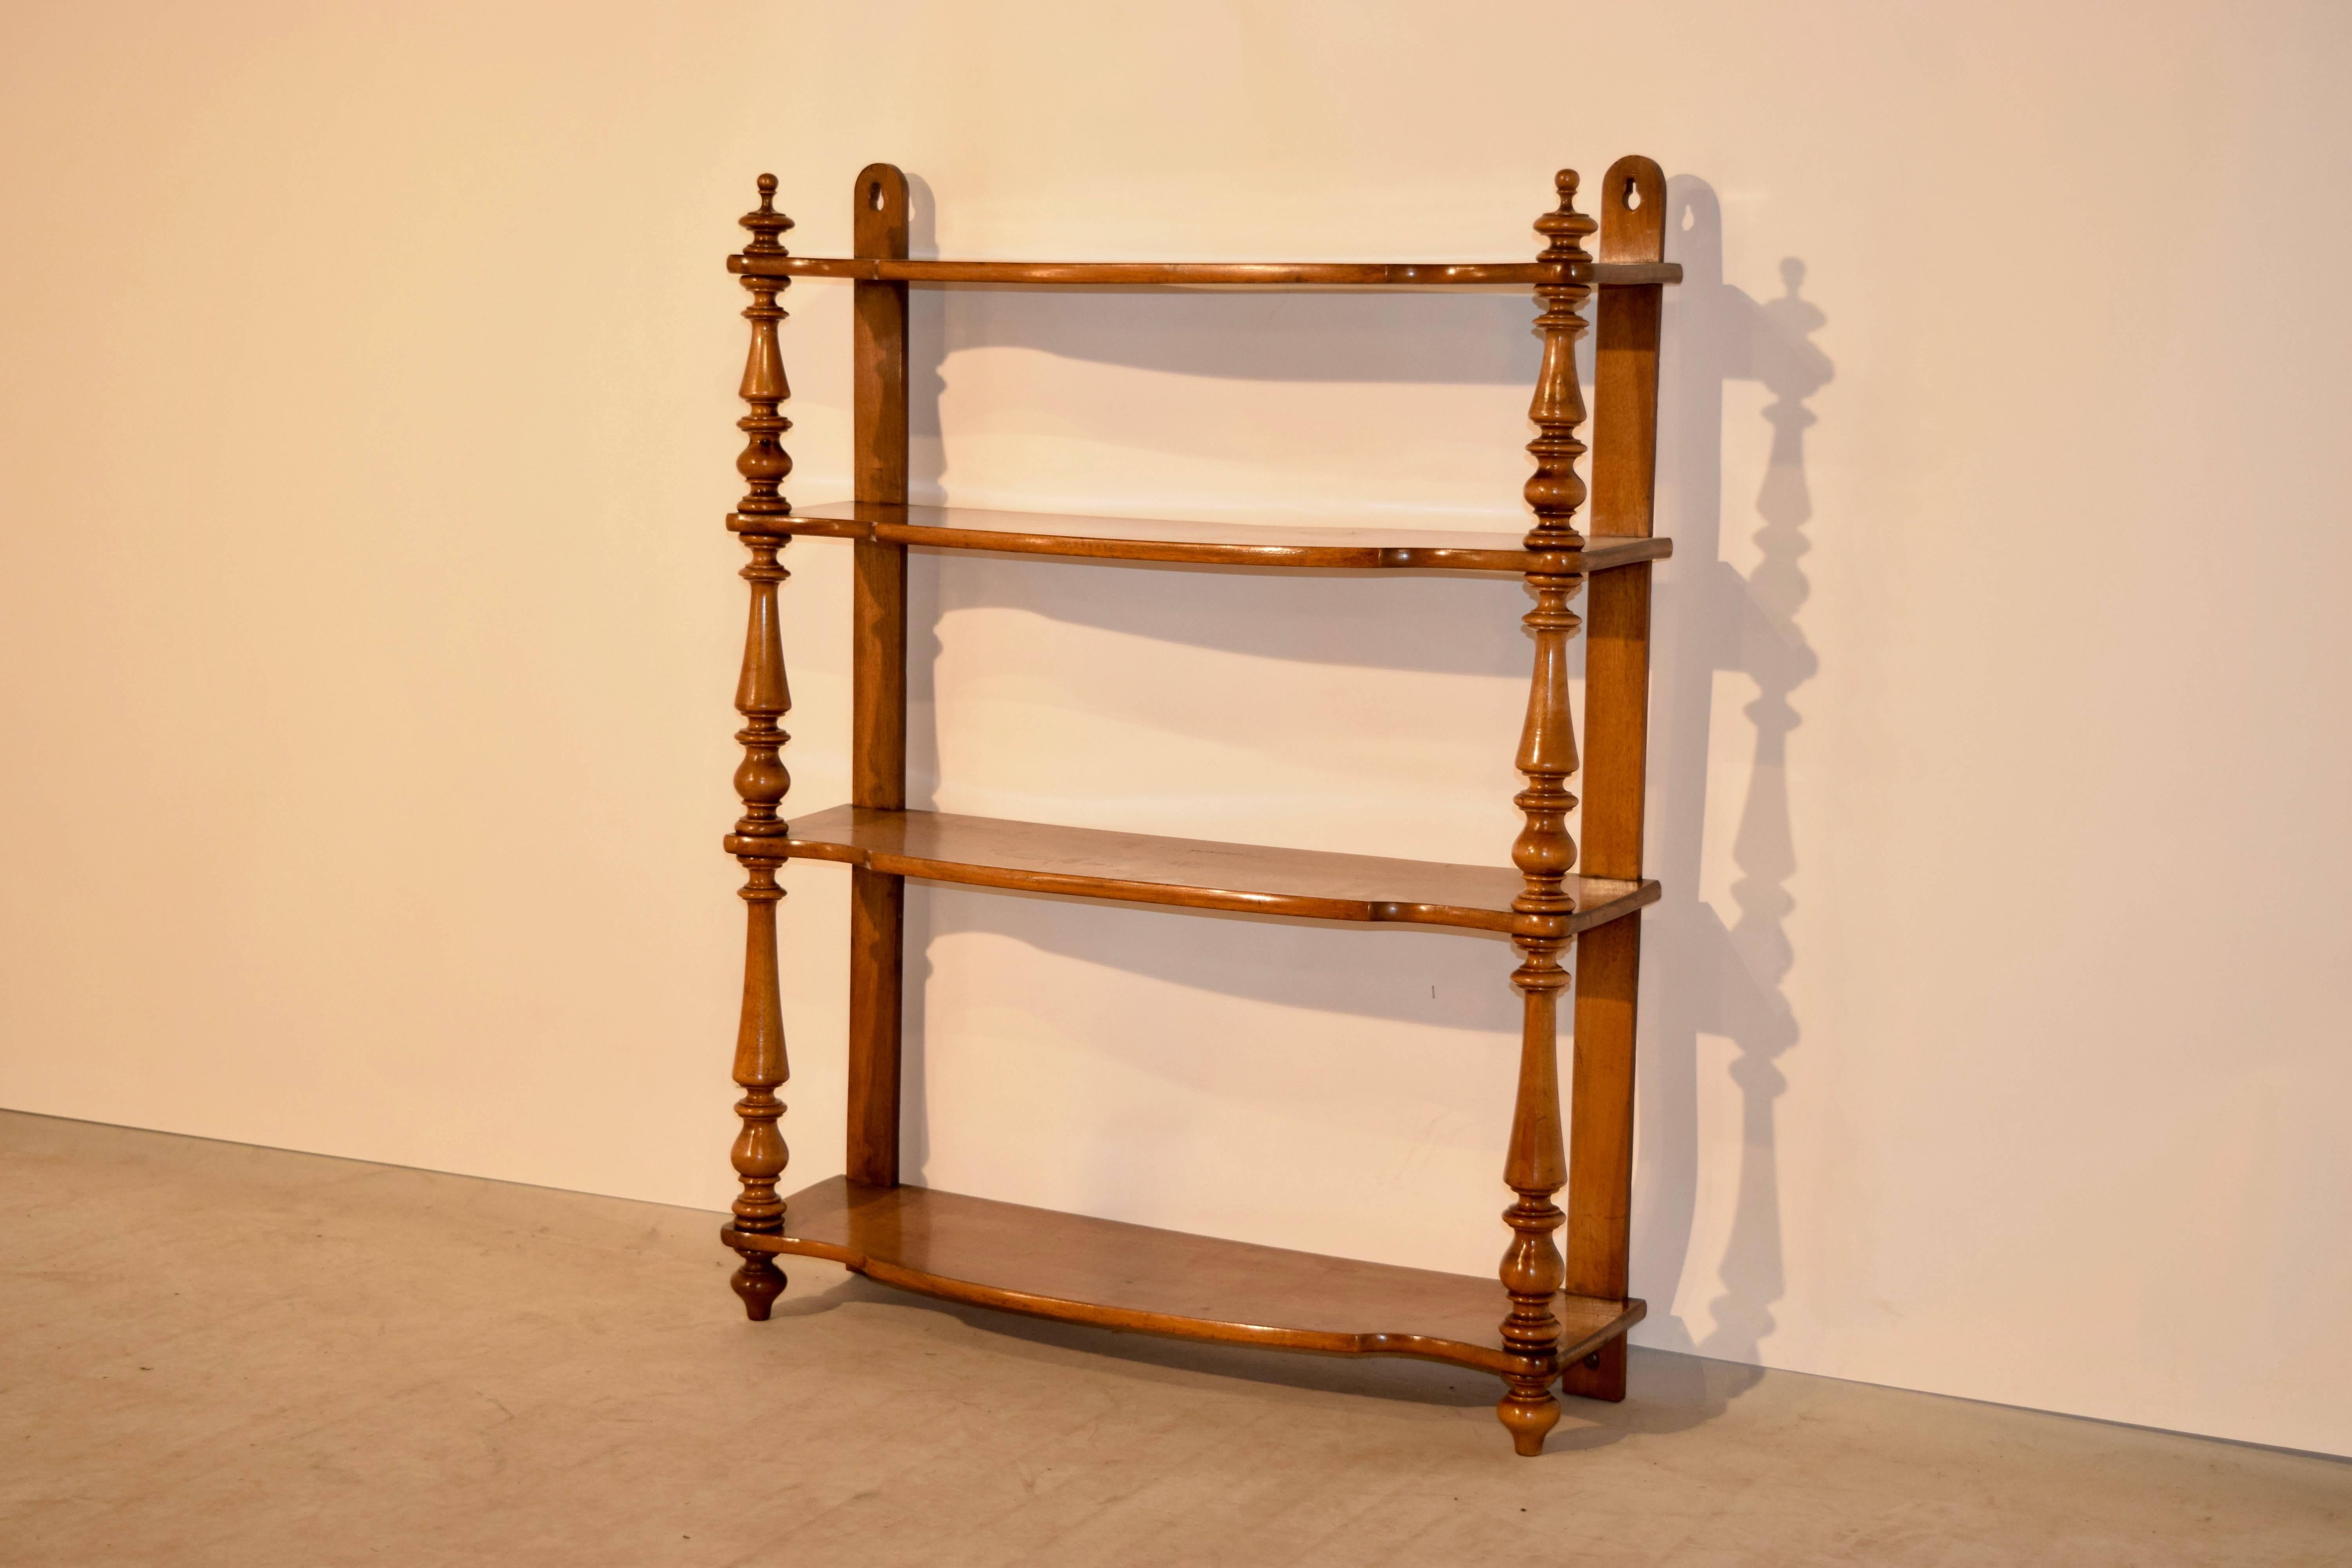 19th century French hanging shelf made from cherry. It has four shelves, all of which are shaped and have wonderful graining, separated by hand-turned shelf supports on the front and flat back supports for easy placement against a wall.